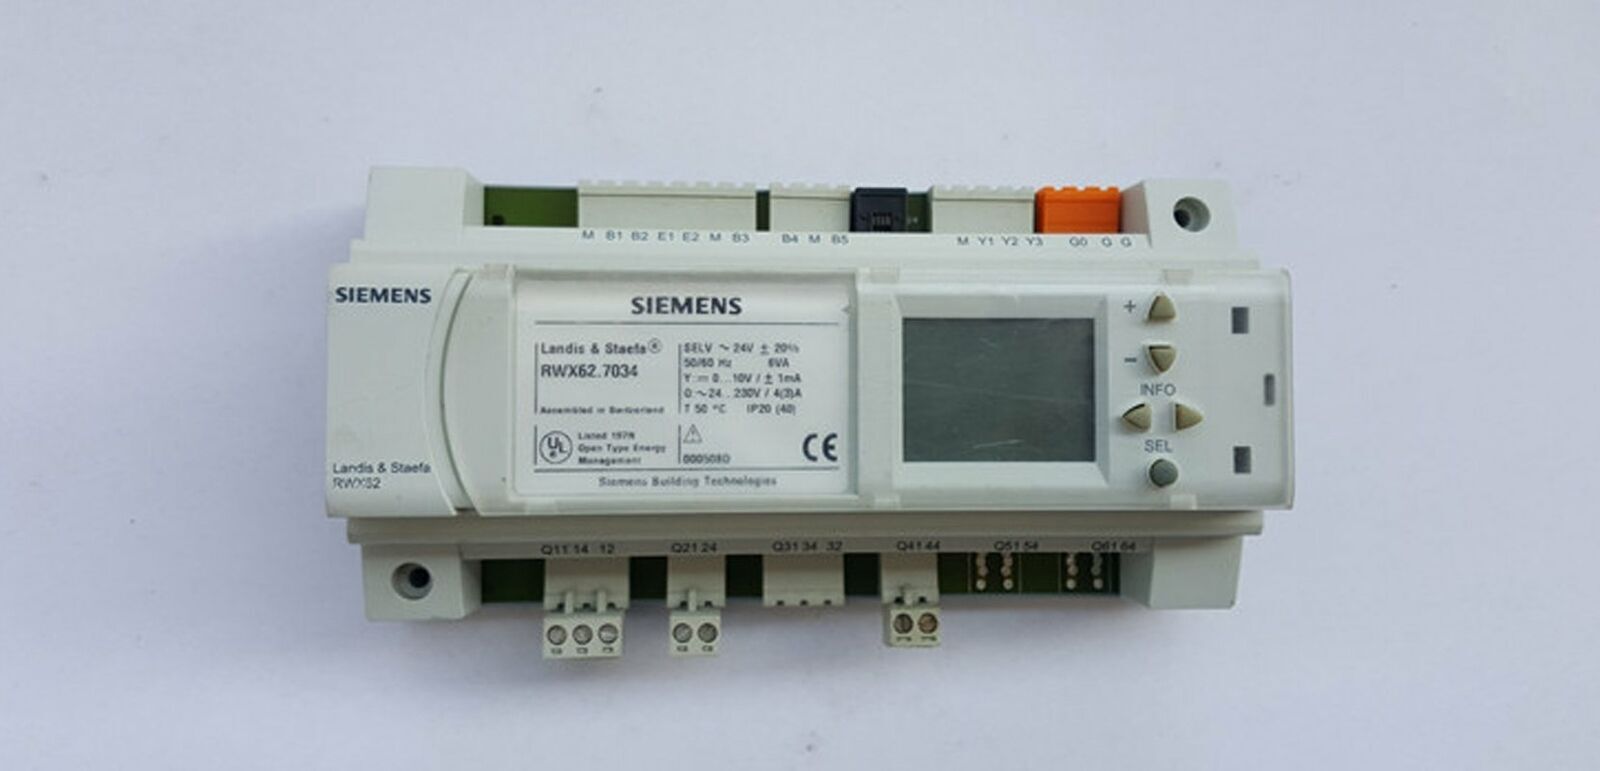 used 1 PC  Siemens RWX62.7034 Controller Module In Good Condition